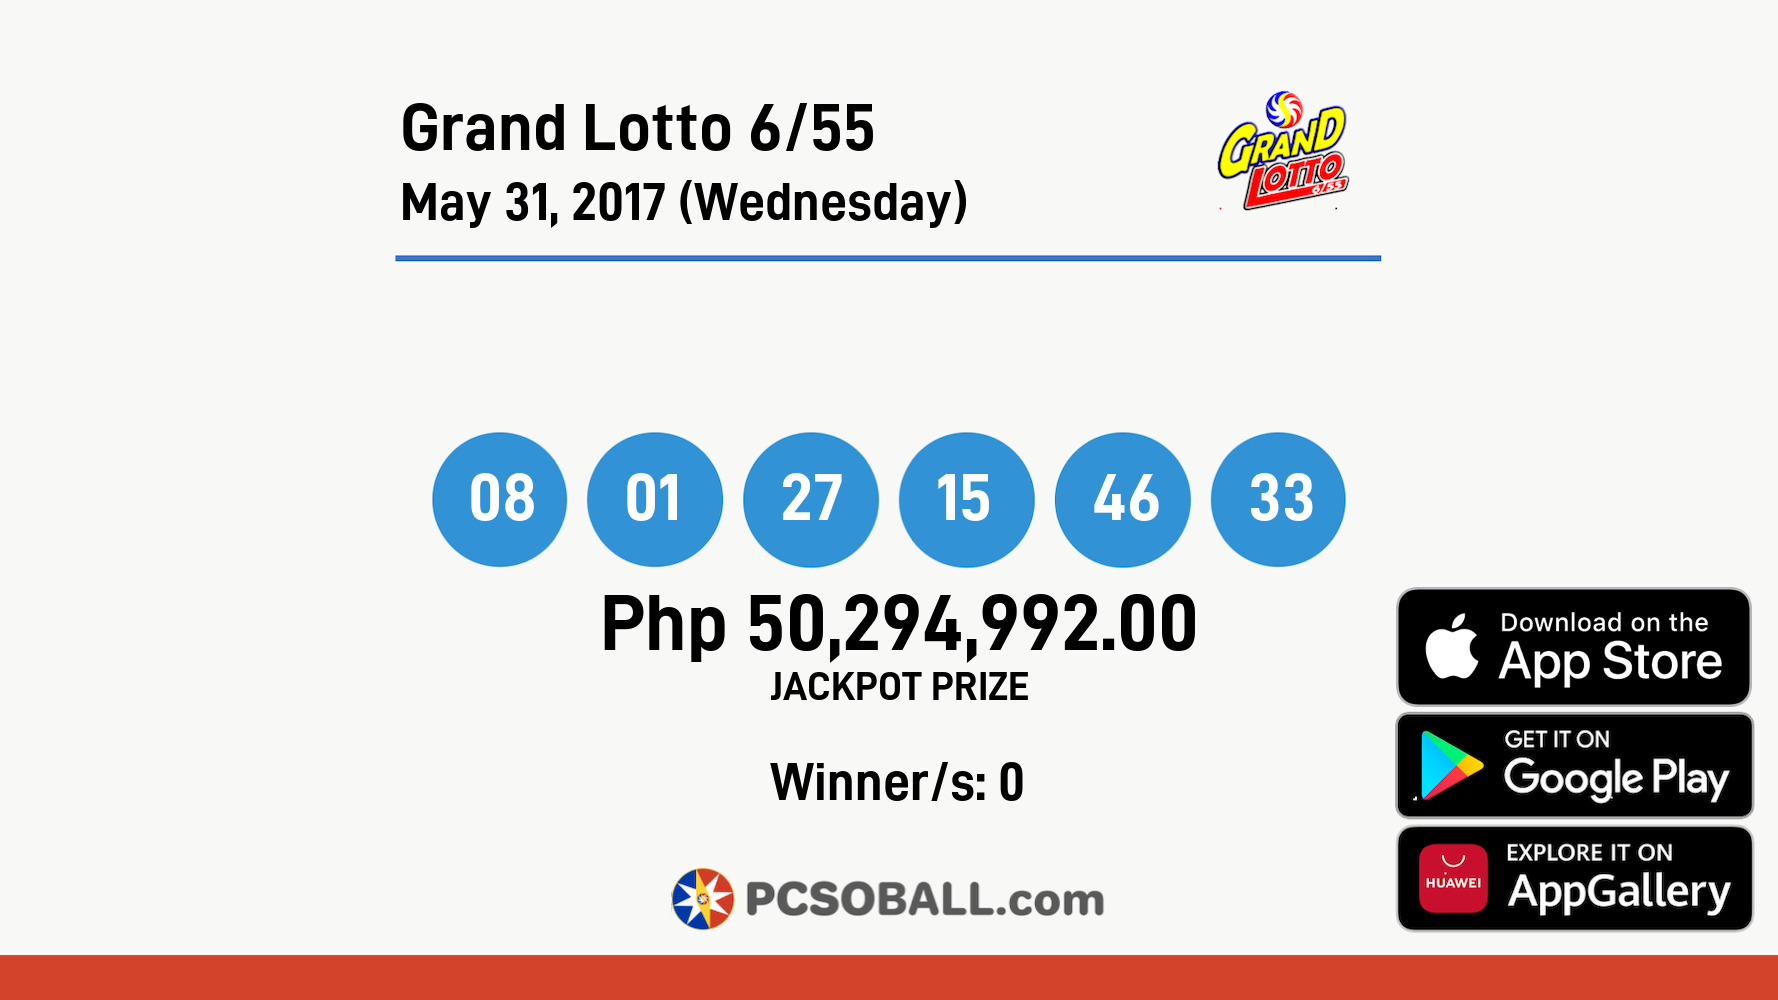 Grand Lotto 6/55 May 31, 2017 (Wednesday) Result